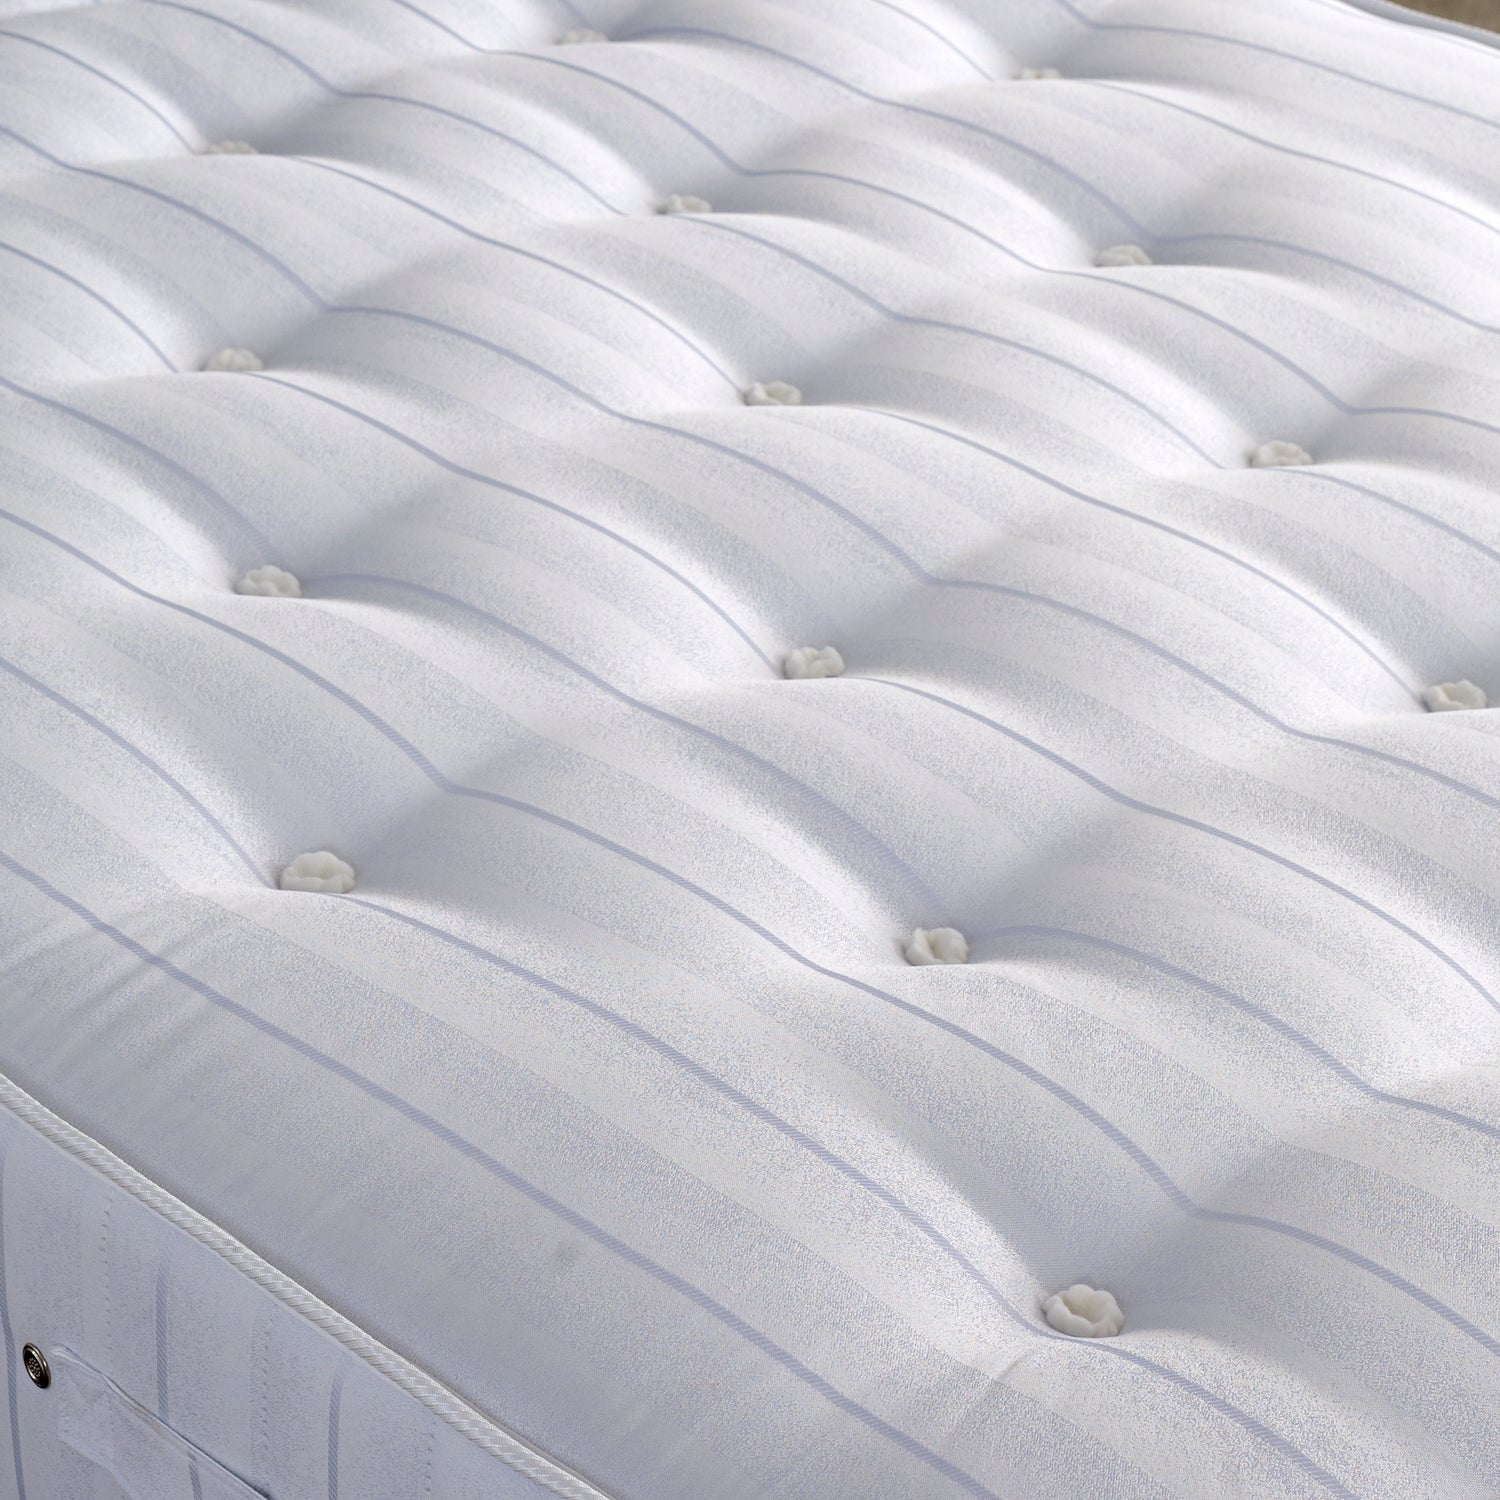 Bedmaster Super Ortho Mattress Cover Close Up-Better Bed Company